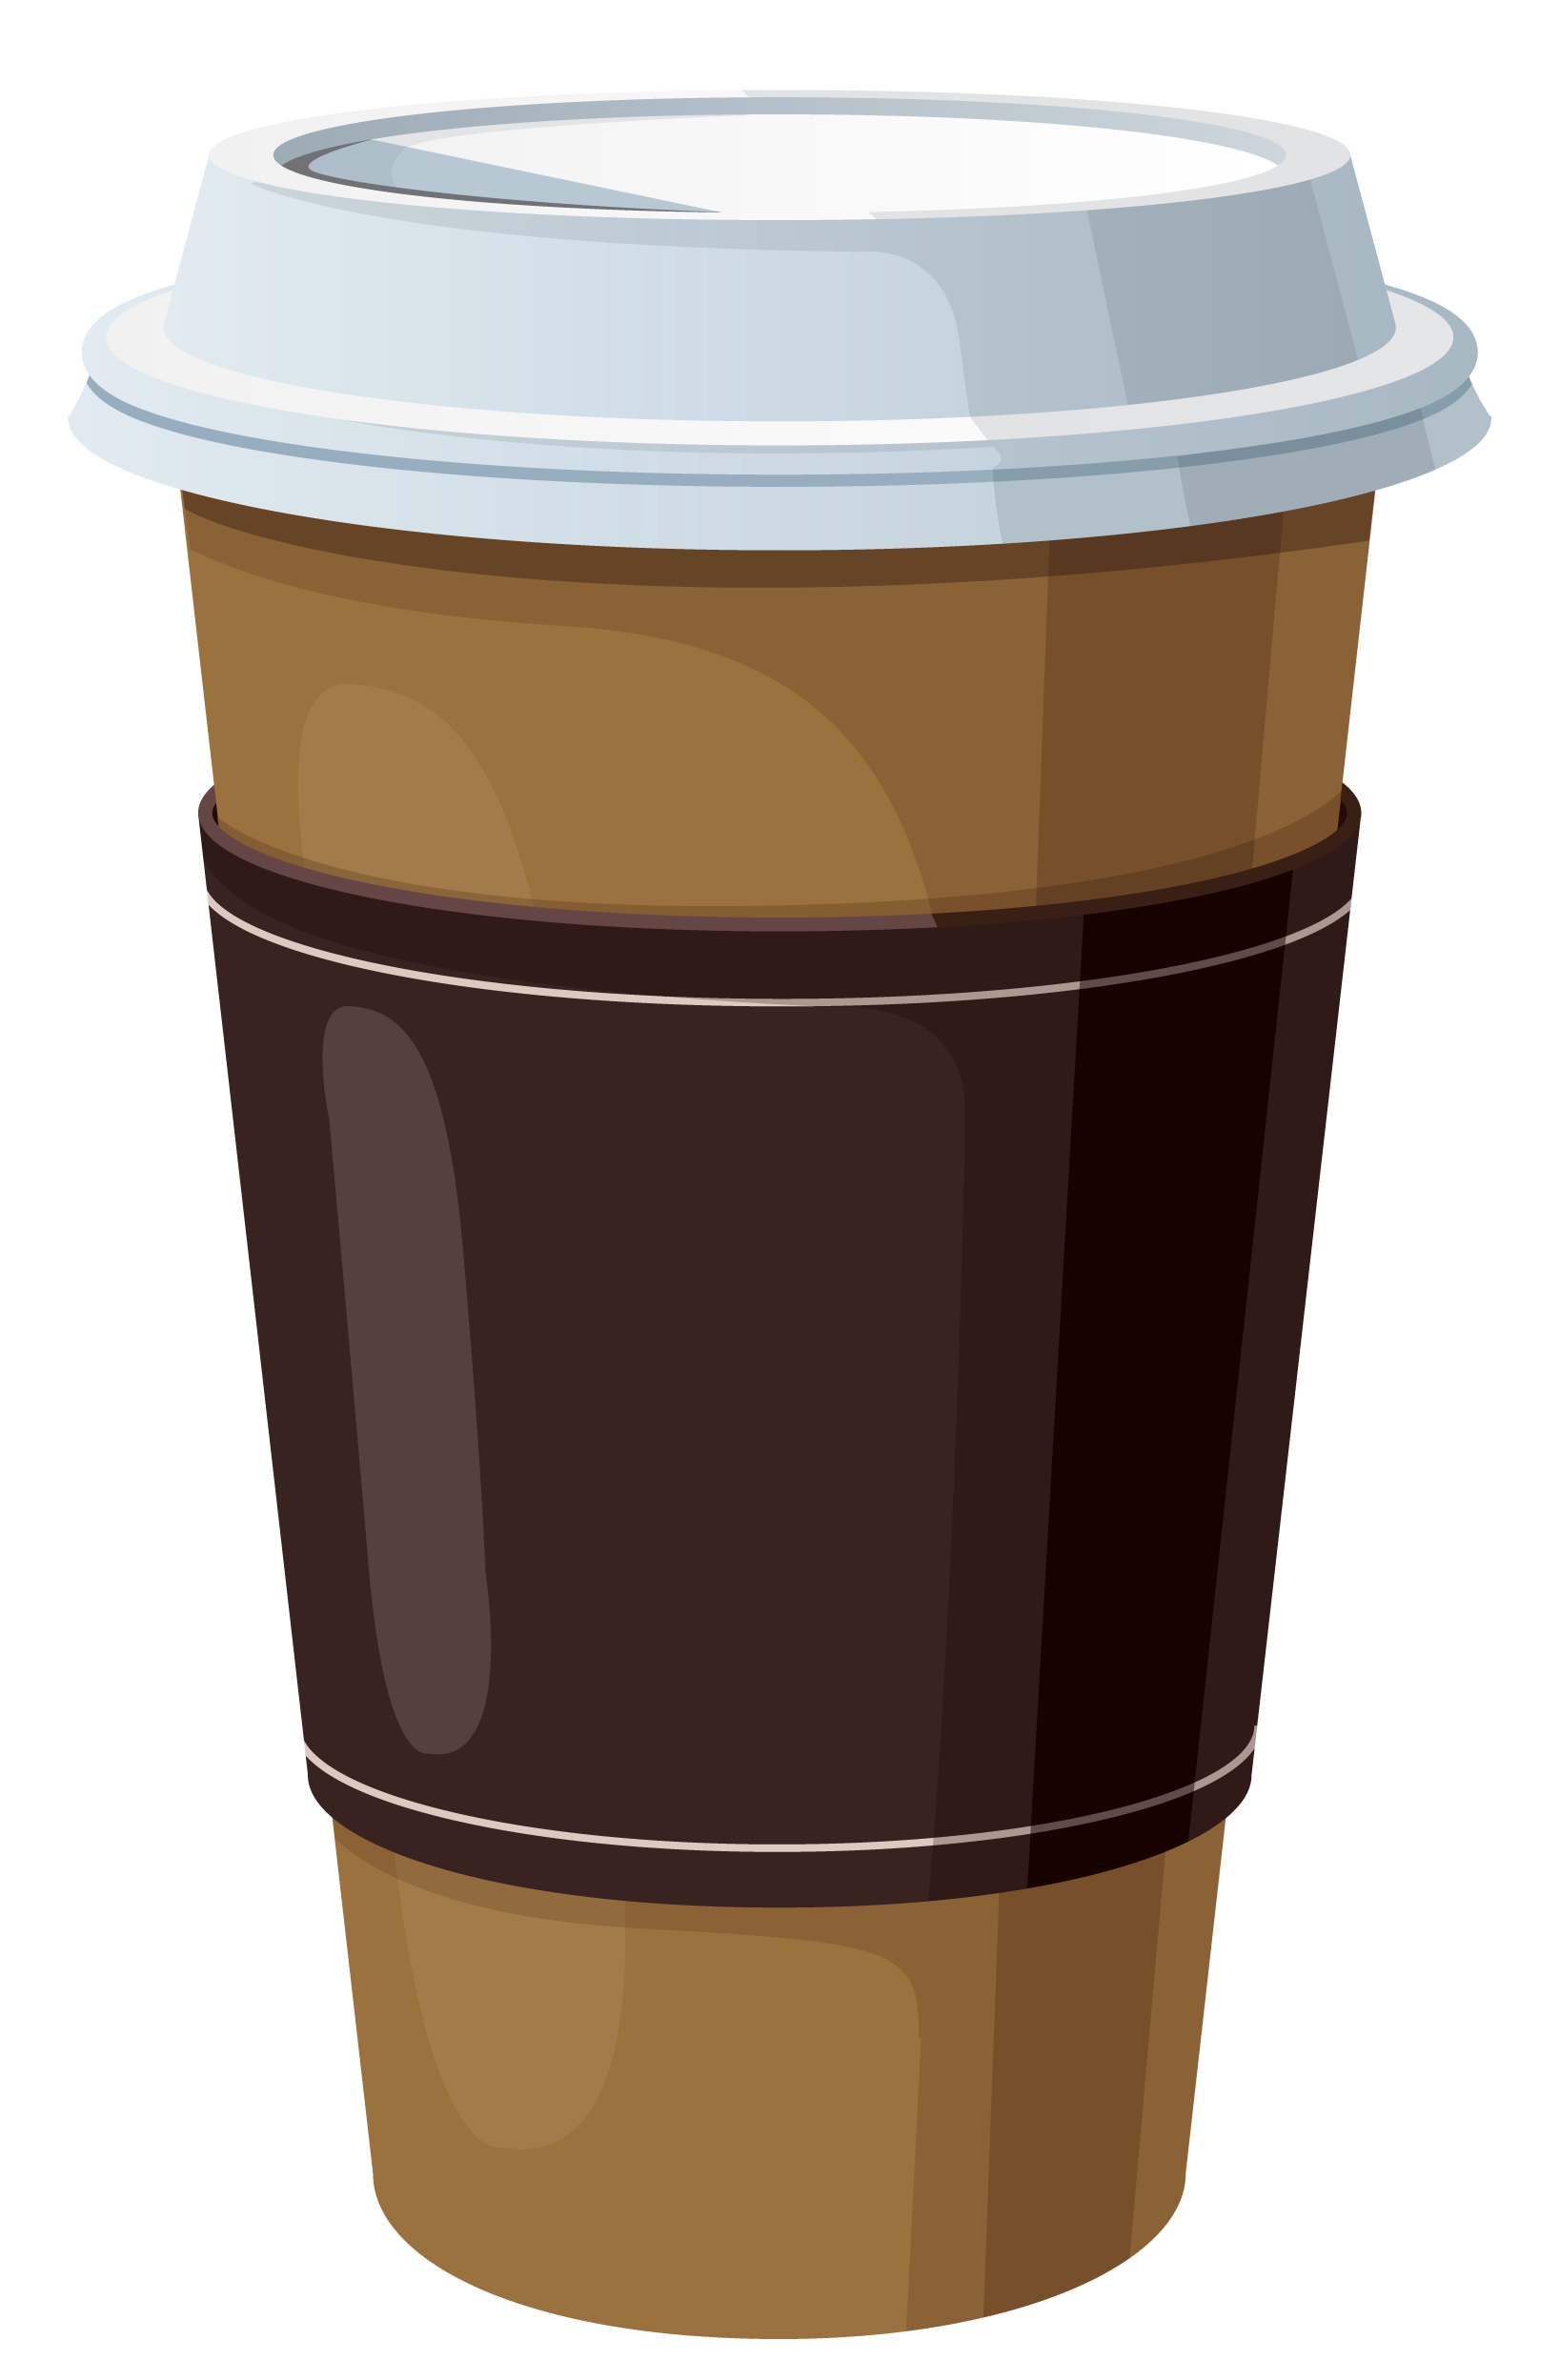 Cup of Coffee PNG Clipart - Best WEB Clipart